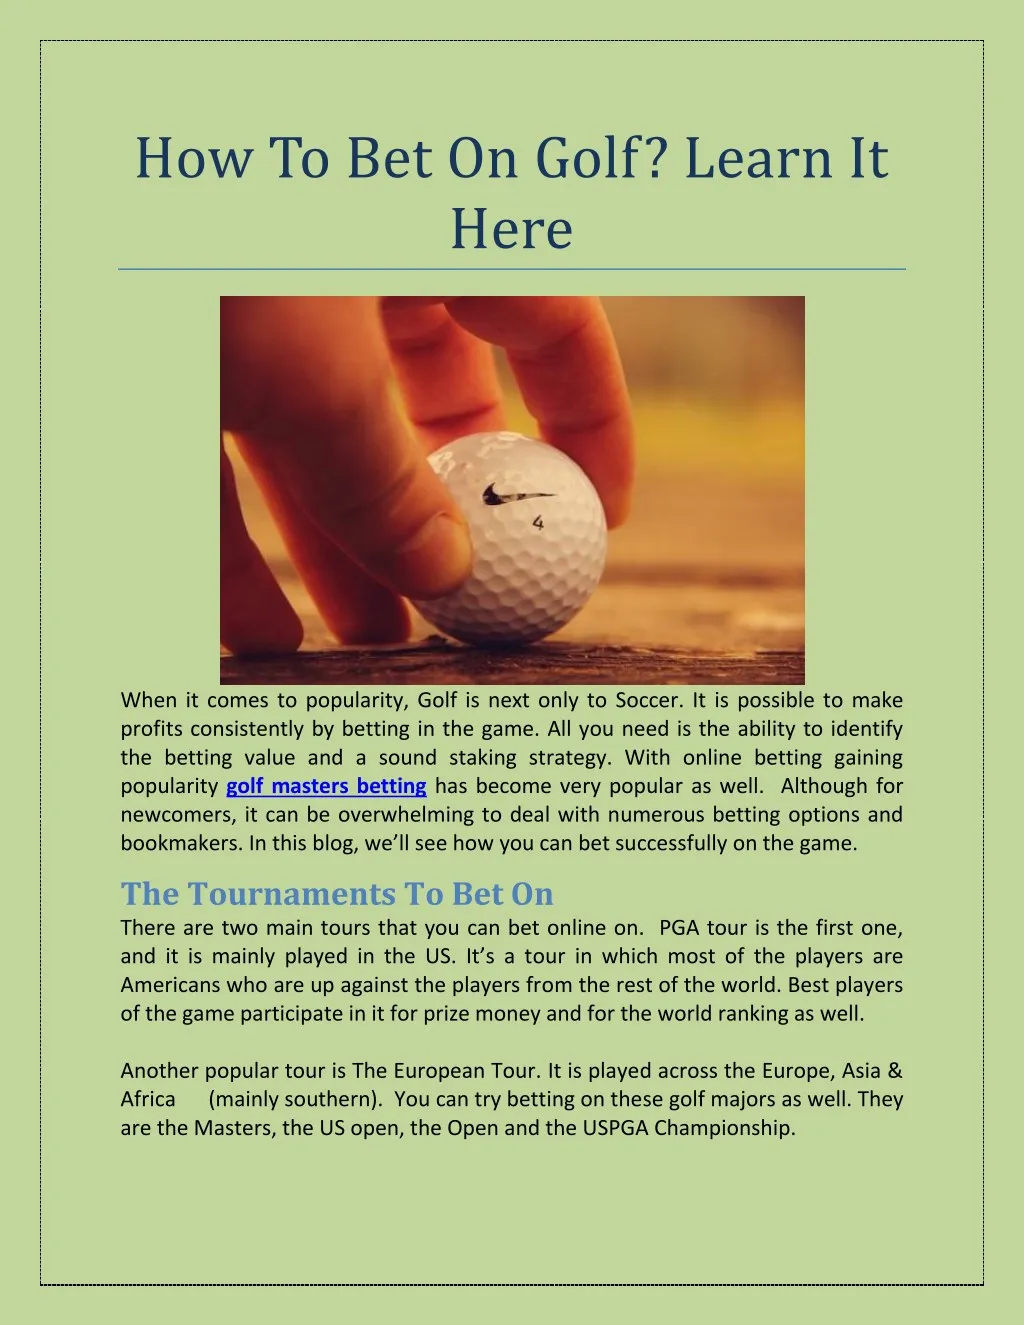 how to bet on golf learn it here